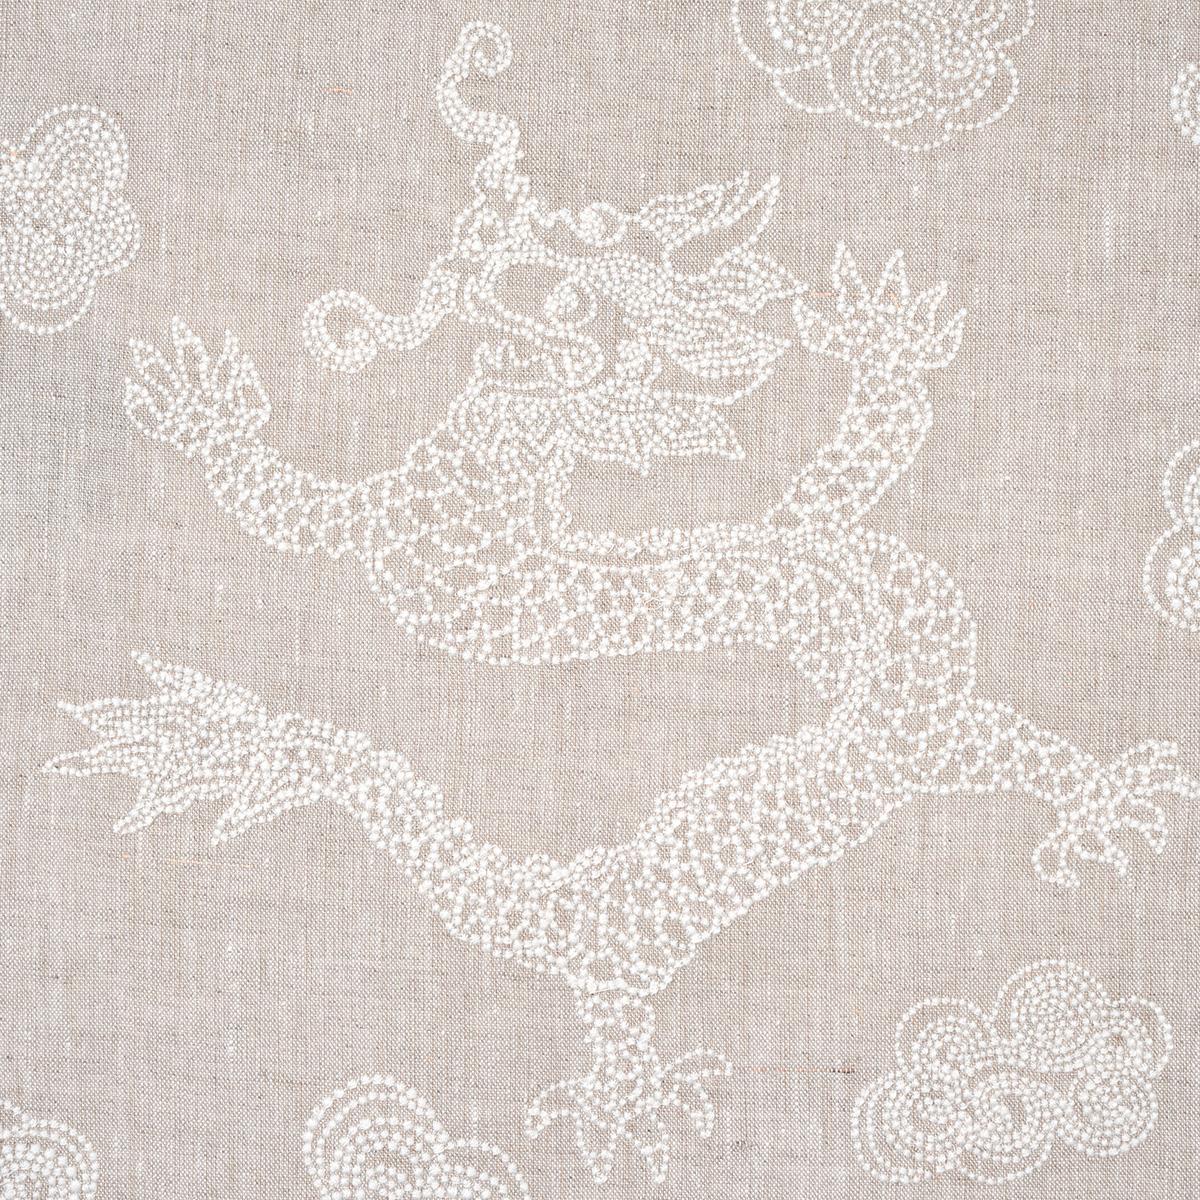 DRAGON EMBROIDERY_IVORY ON NATURAL